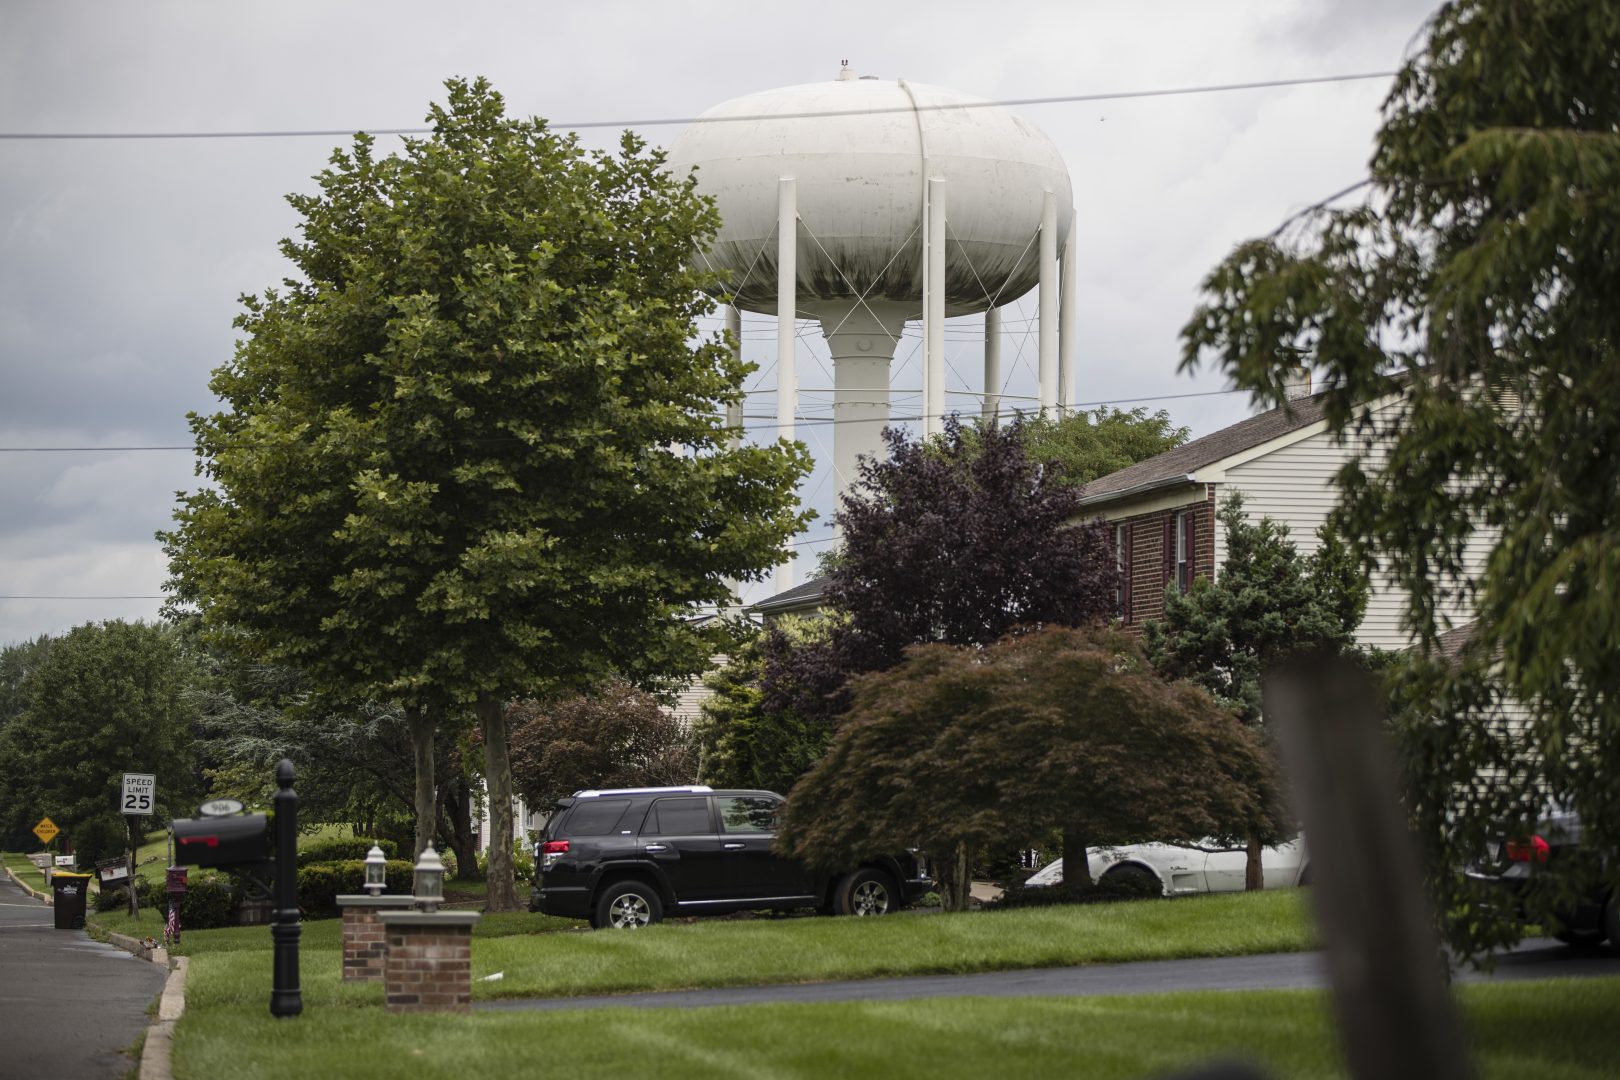 In this Aug. 1, 2018 photo, a water tower stands above a residential neighborhood in Horsham, Pa. In Horsham and surrounding towns in eastern Pennsylvania, and at other sites around the United States, the foams once used routinely in firefighting training at military bases contained per-and polyfluoroalkyl substances, or PFAS. EPA testing between 2013 and 2015 found significant amounts of PFAS in public water supplies in 33 U.S. states. 